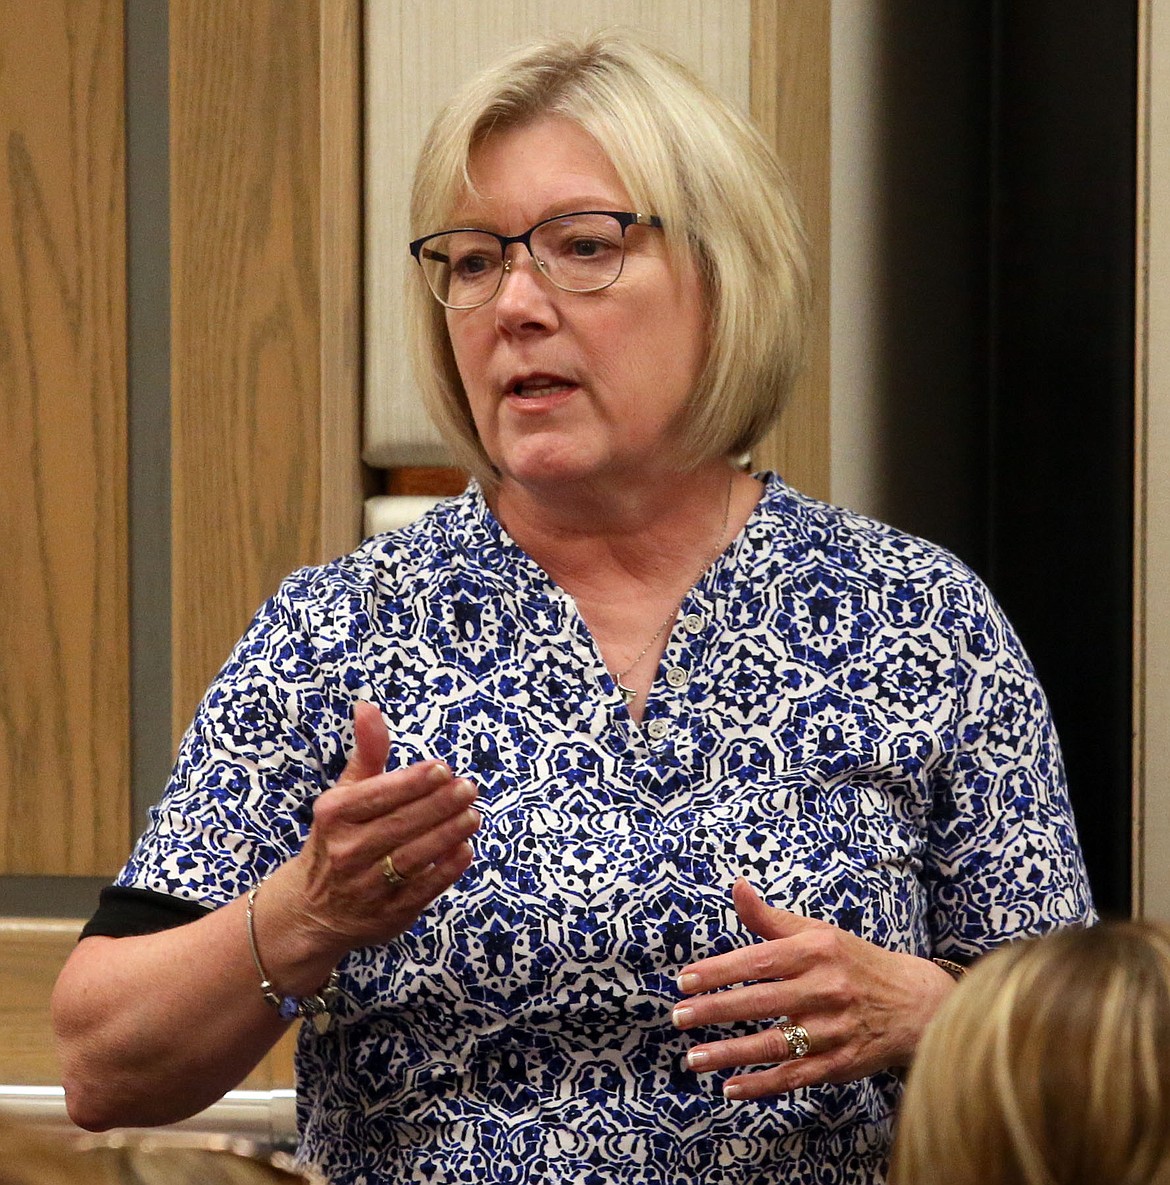 Post Falls School District trustee Michelle Lippert spoke in favor of more state money for school buildings at a forum on public education funding Tuesday. (JUDD WILSON/Press)